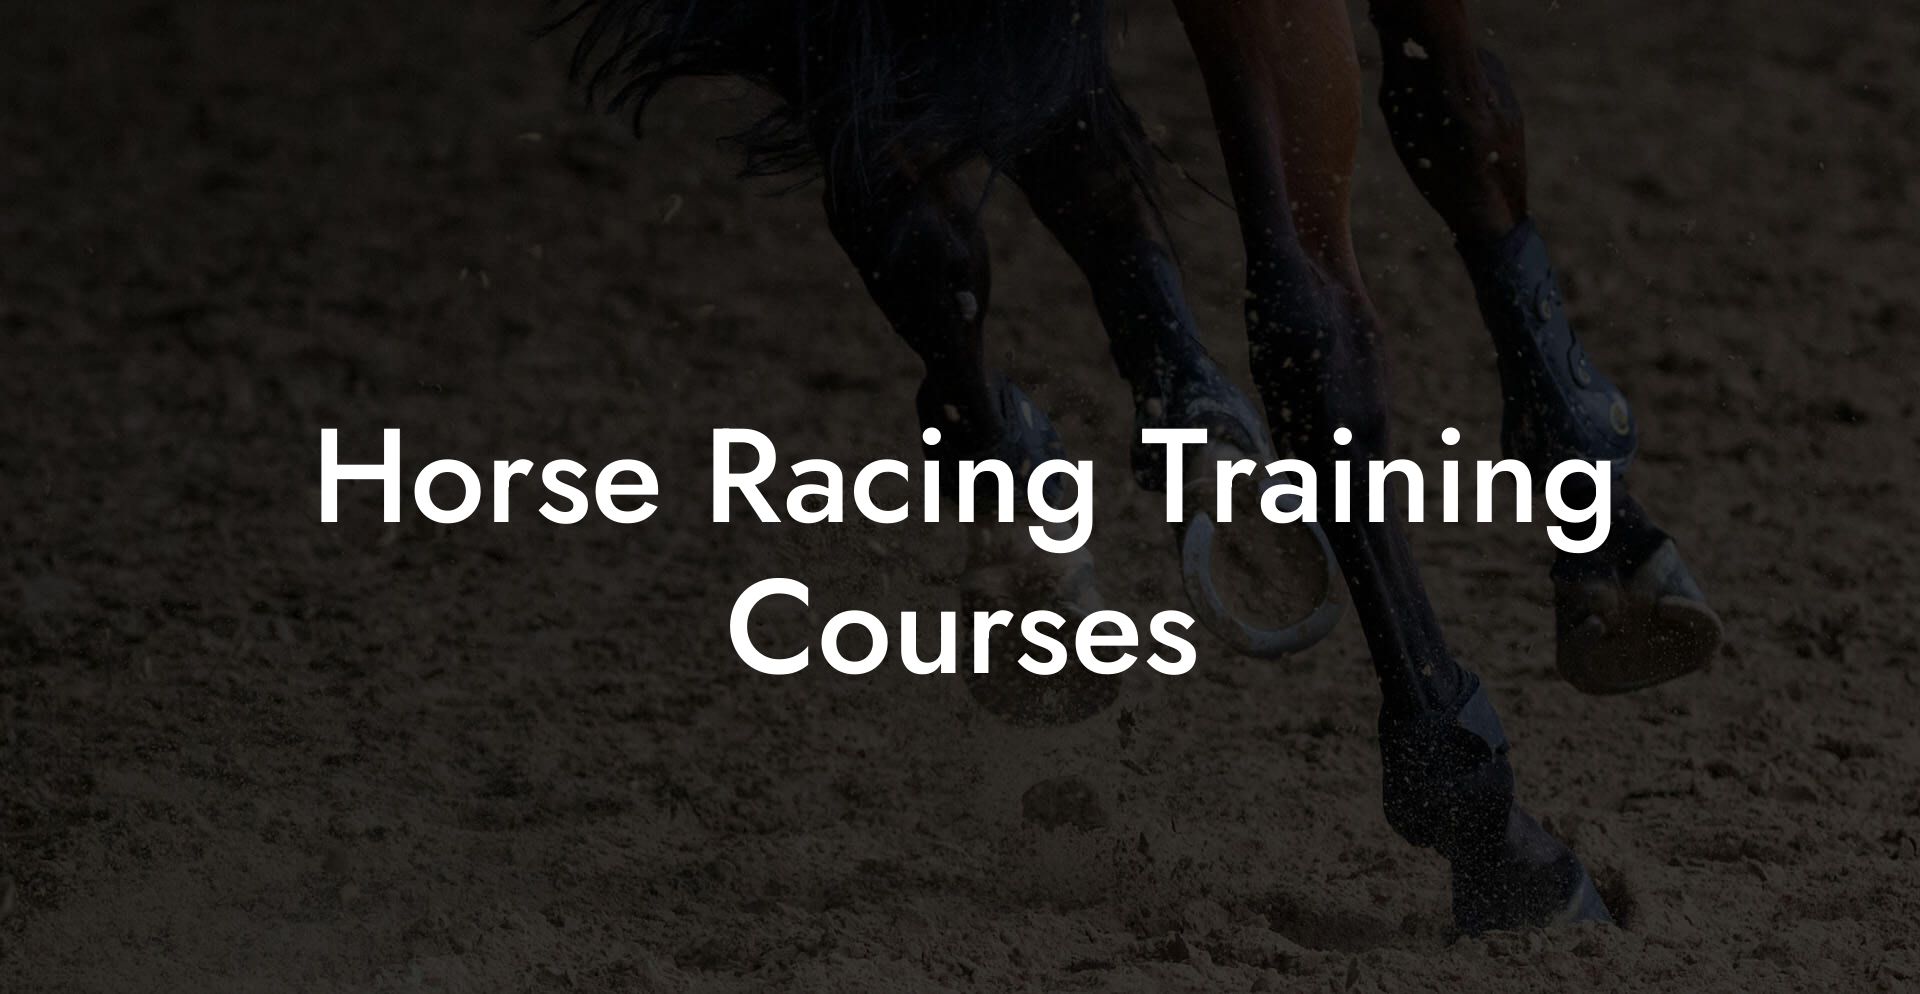 Horse Racing Training Courses